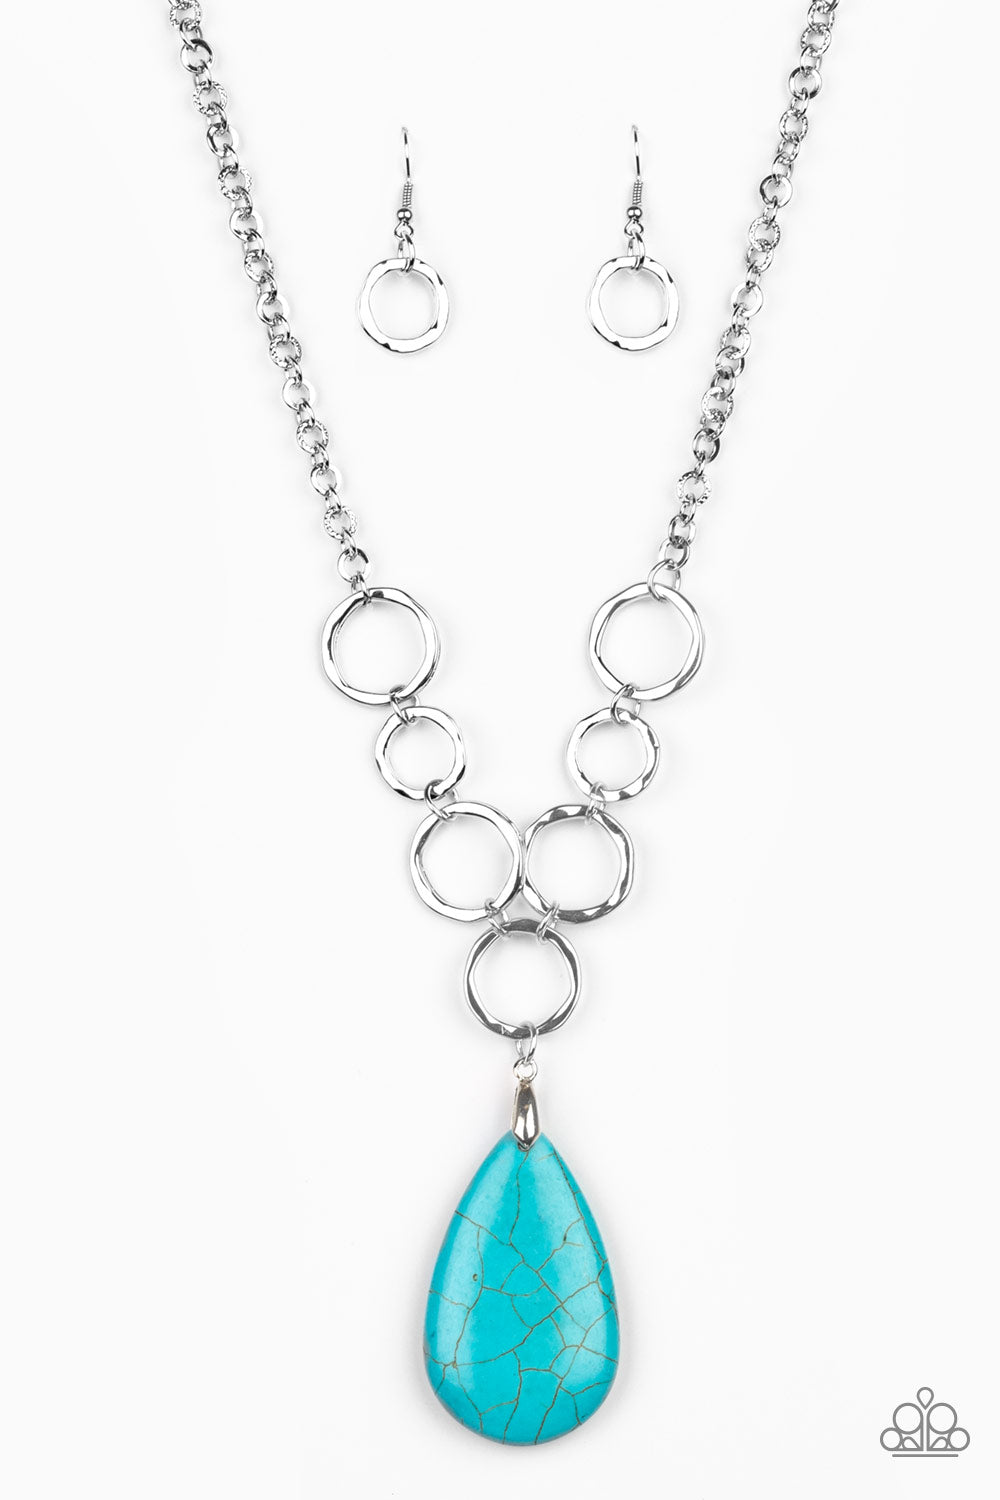 Living on a Prairie, blue - VJ Bedazzled Jewelry